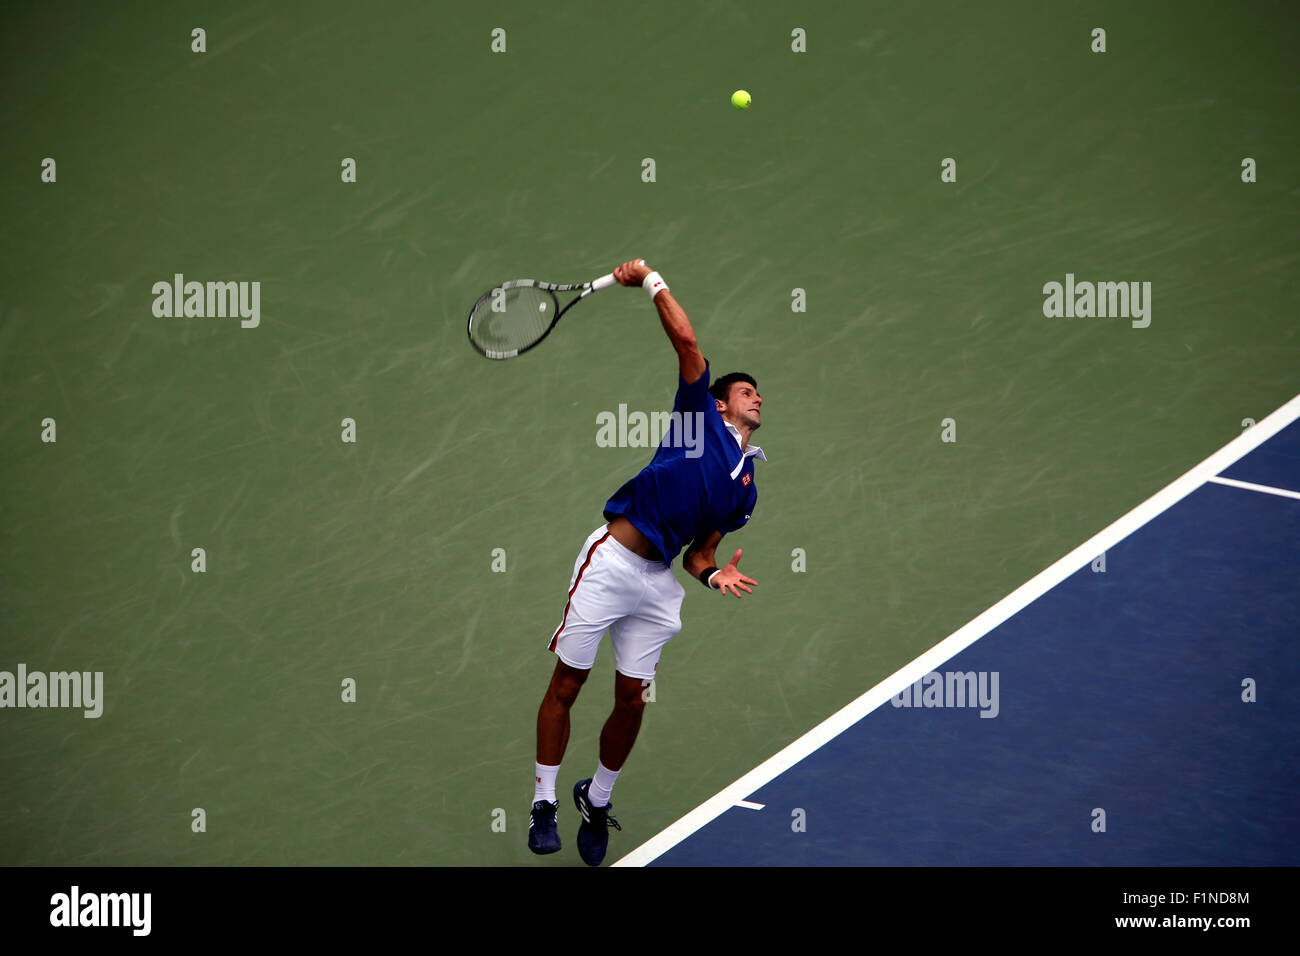 New York, USA. 4th September, 2015. Novak Djokovic serving during his third round match against Andreas Seppi of Italy at the U.S. Open in Flushing Meadows, New York on September 4th, 2015. Credit:  Adam Stoltman/Alamy Live News Stock Photo